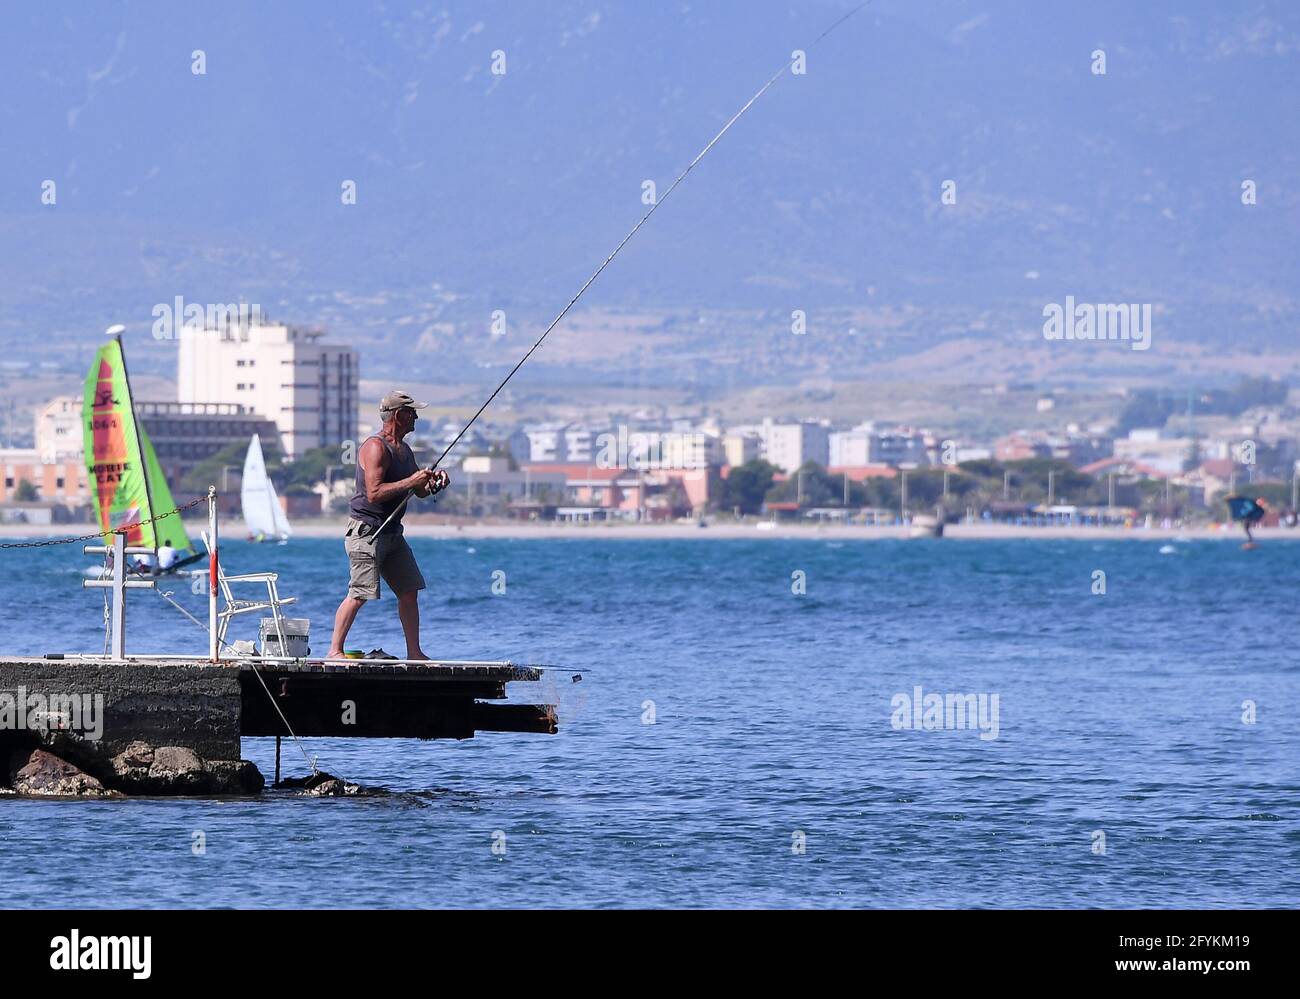 Cagliari, Italy. 28th May, 2021. A man fishes at the seaside in Cagliari, Sardinia, Italy, on May 28, 2021. All Italian regions have turned to 'yellow' since Monday, indicating a low risk of contagion, and the lowest level of anti-COVID-19 restrictions, according to the country's national health authorities. Credit: Alberto Lingria/Xinhua/Alamy Live News Stock Photo